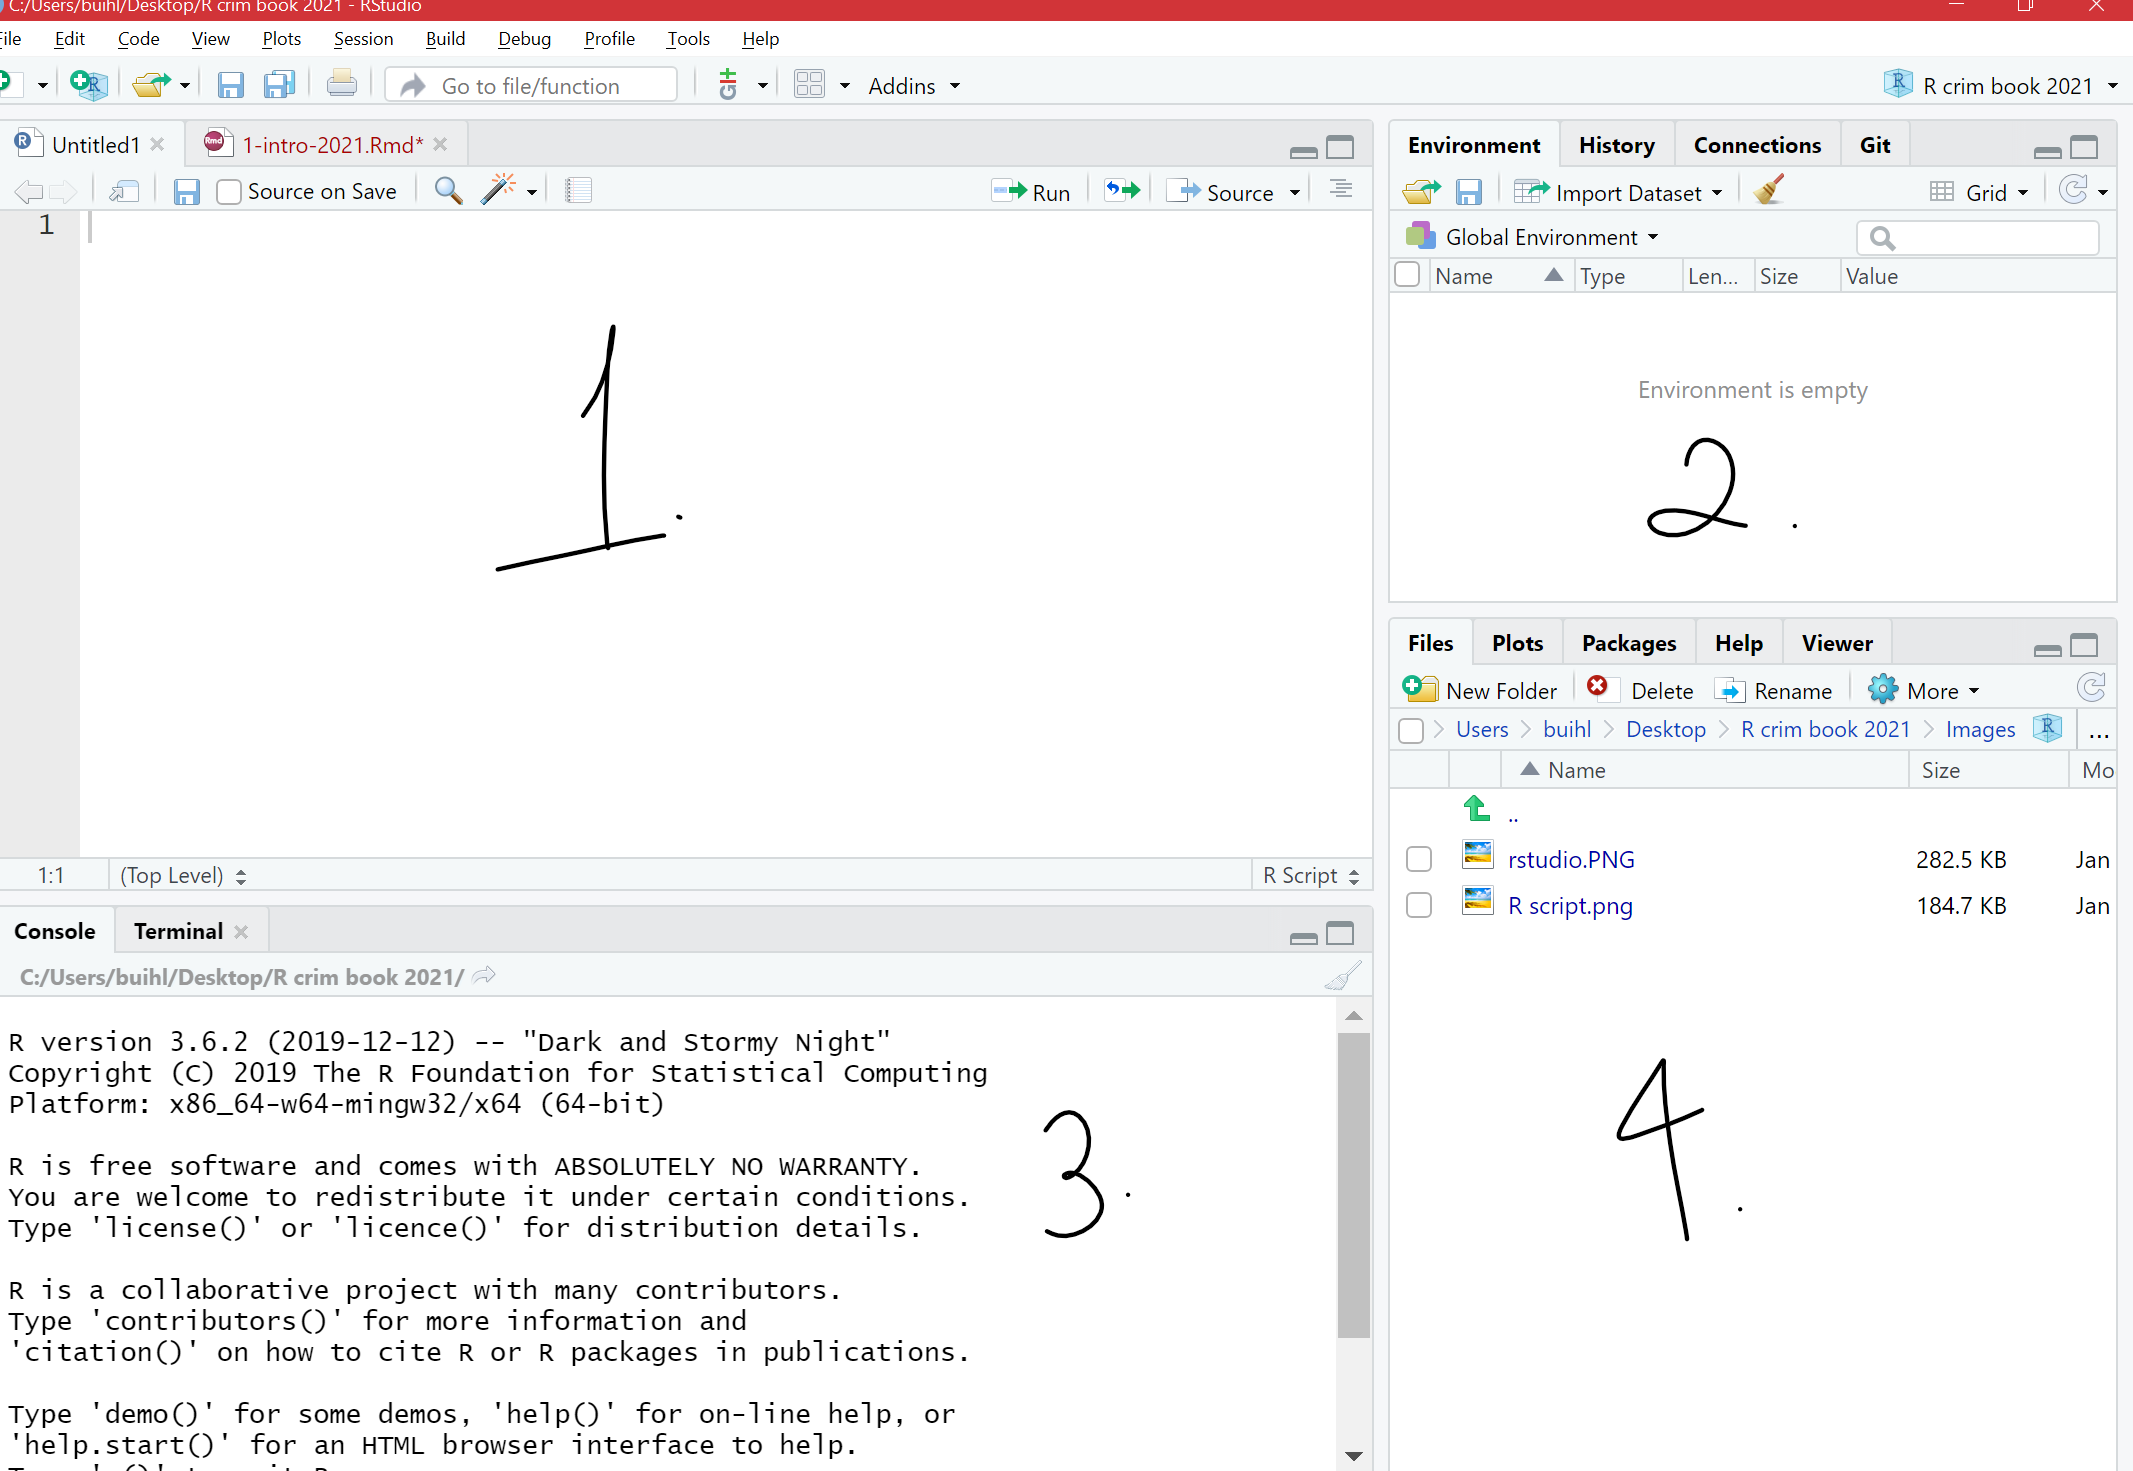 A screen capture of the RStudio desktop app, now with four panes dividing the main window. Compared to before, the pane containing 'R Console' has been squished down, and an equal size pane has appeared above it. That pane contains tabs for two open files, along with some buttons running along the top of the the pane, followed by a large text entry area. The four panes are labeled one through four, going left to right, such the new pane has the number one, the one with the 'Environment' tab two, 'Console' three, and the one with the 'Files' tab number four.